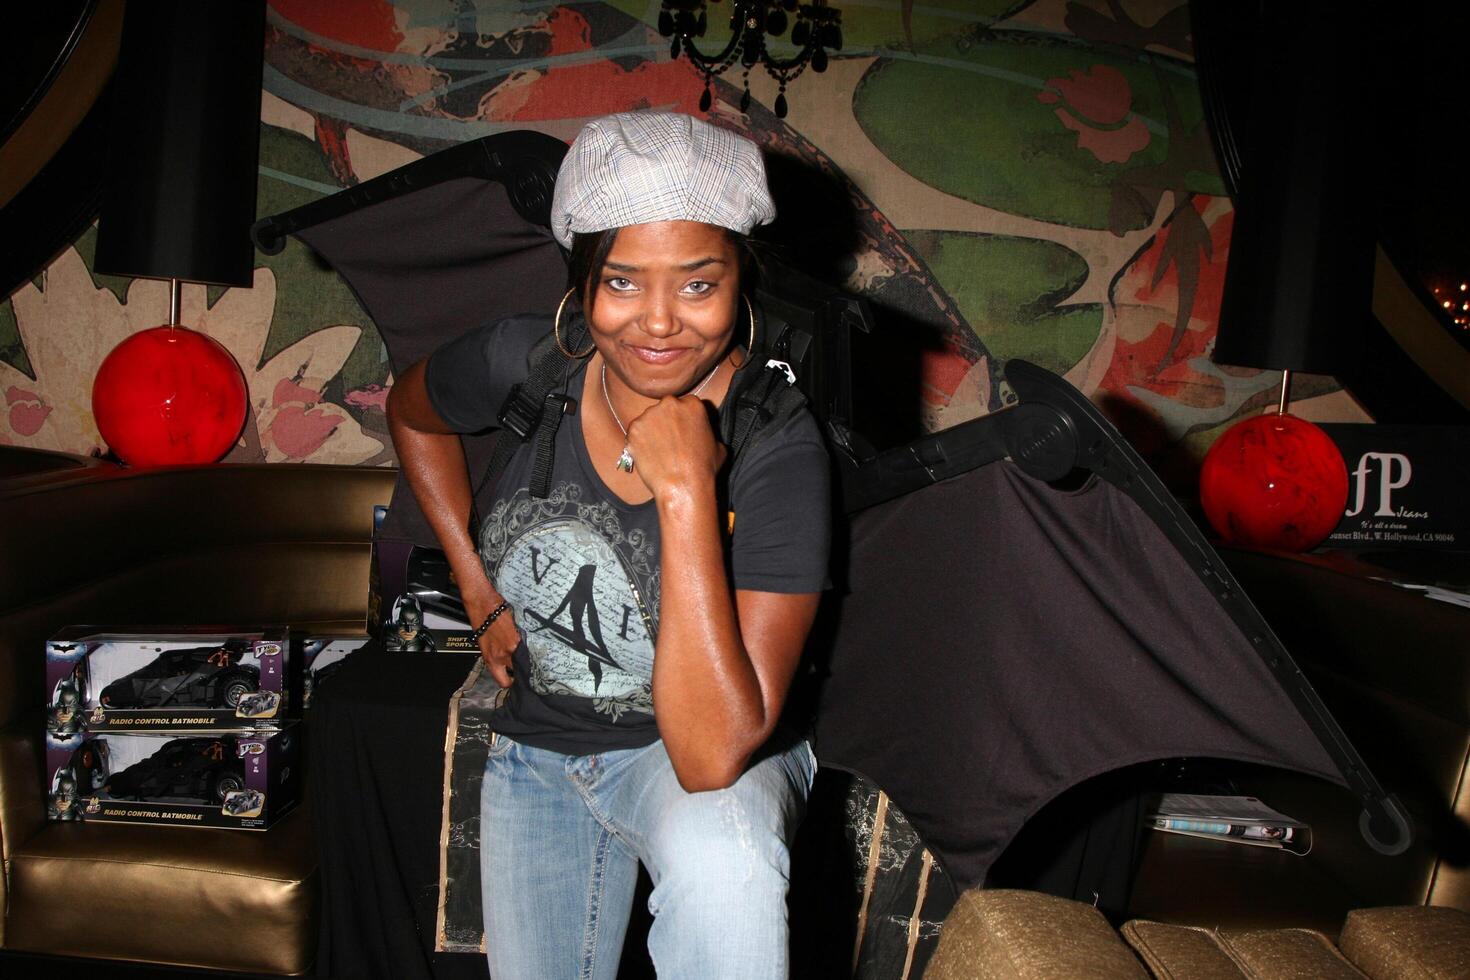 Shar Jackson wearing a pair of play Batman wings from Mattel promoting the Dark Knight movie GBK MTV Movie Awards Gifting Suites  Crimson  Opera Los Angeles,  CA May 31, 2008 photo